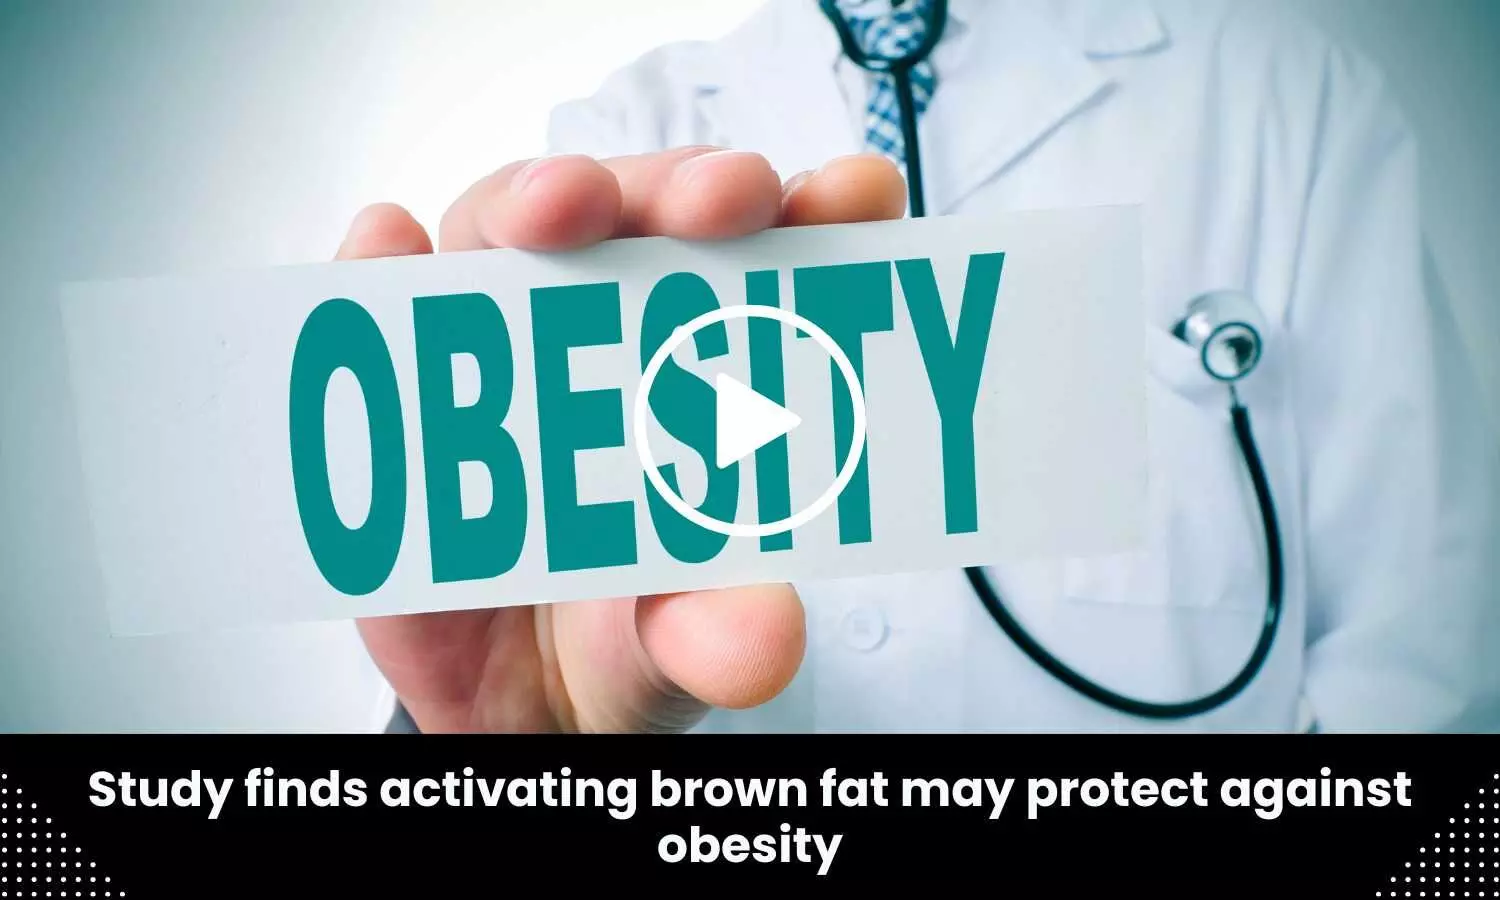 Study finds activating brown fat may protect against obesity